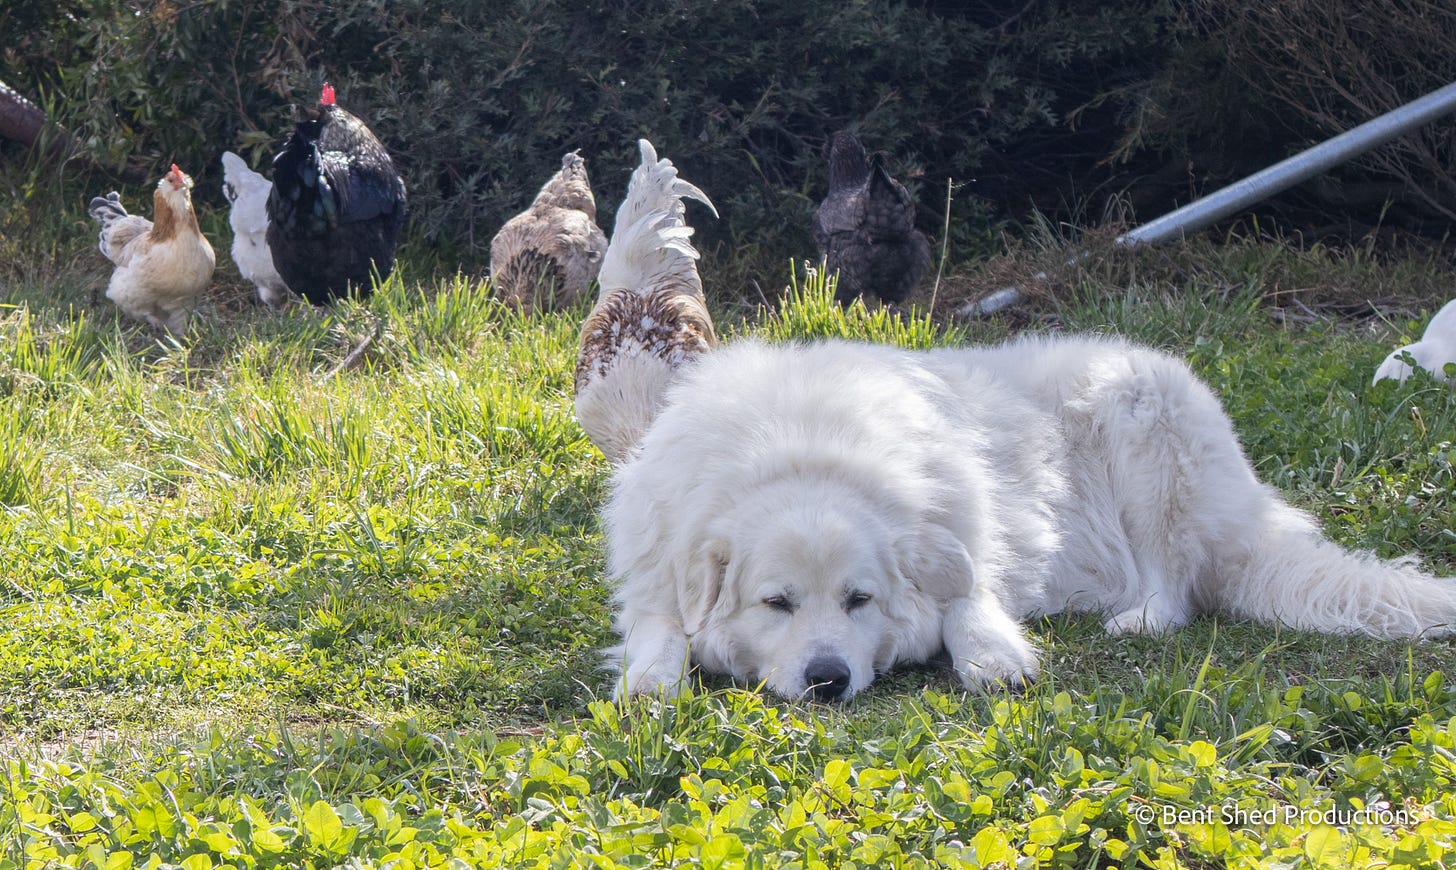 A large white dog lies calmly in front of a group of chickens